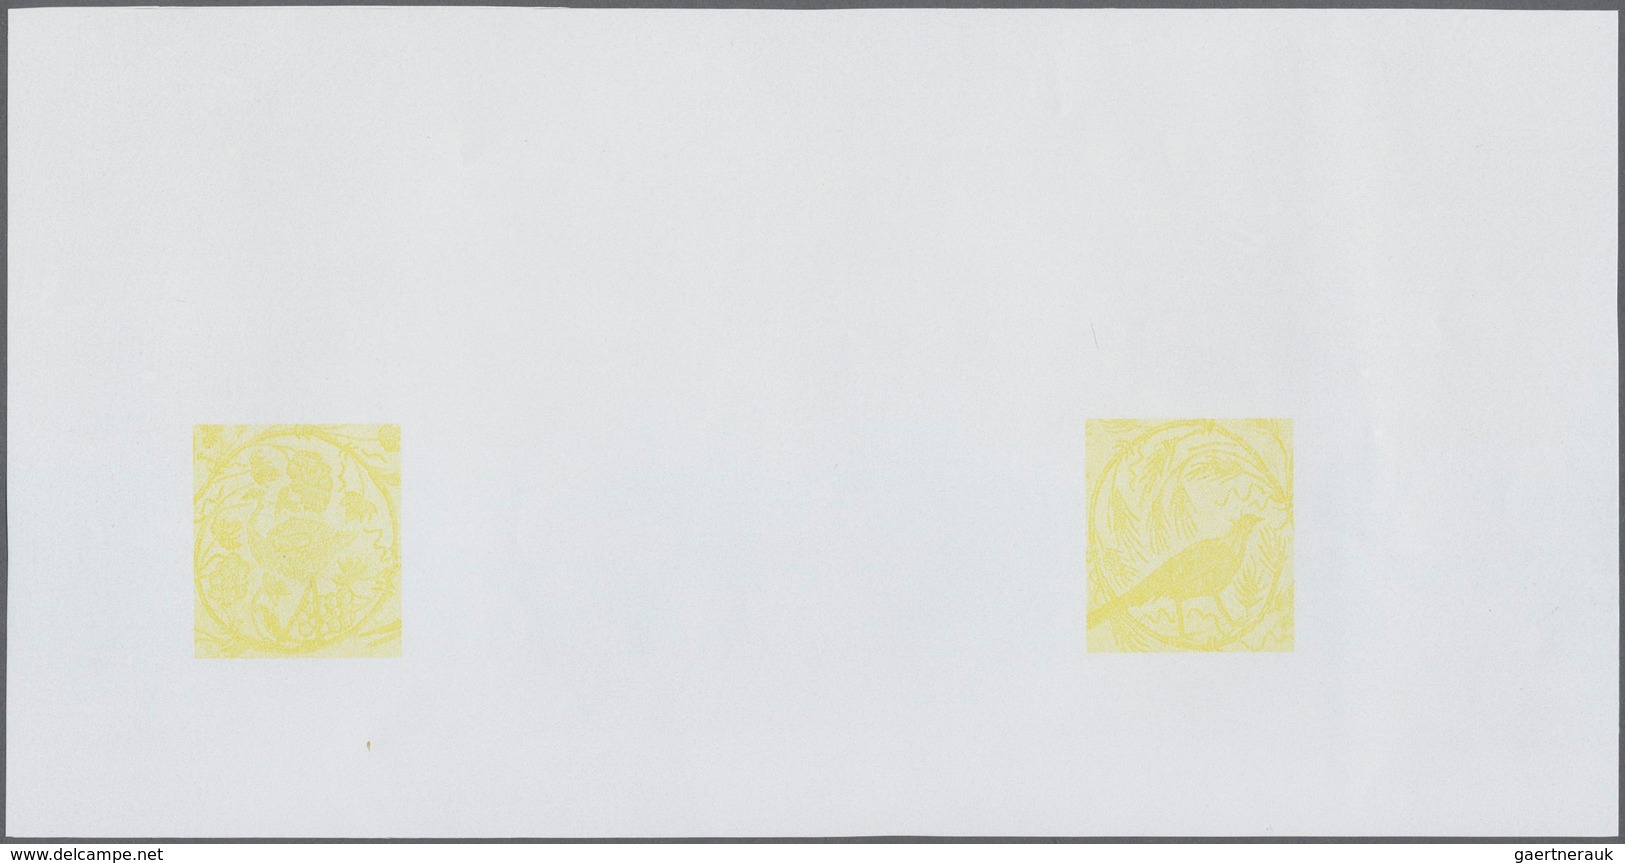 Vereinte Nationen - New York: 1969, collective, progressive proofs (9 phases) for the issue "Art at